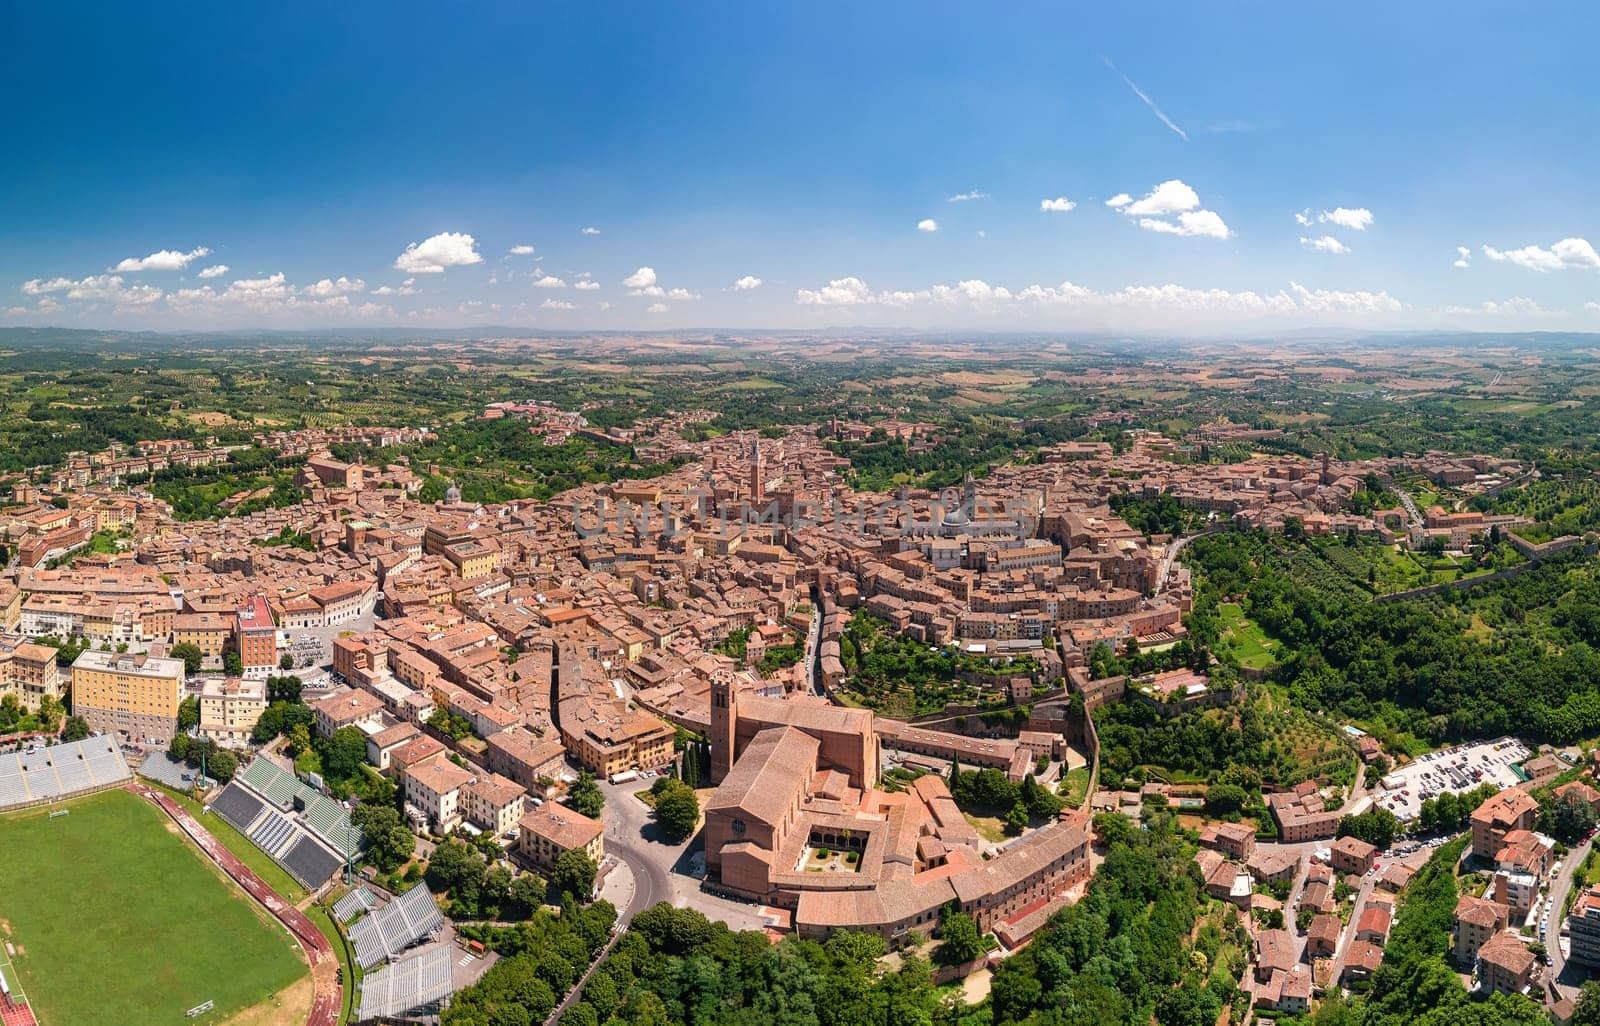 Aerial view over the medieval city of Siena, Toscana, Italy by mot1963